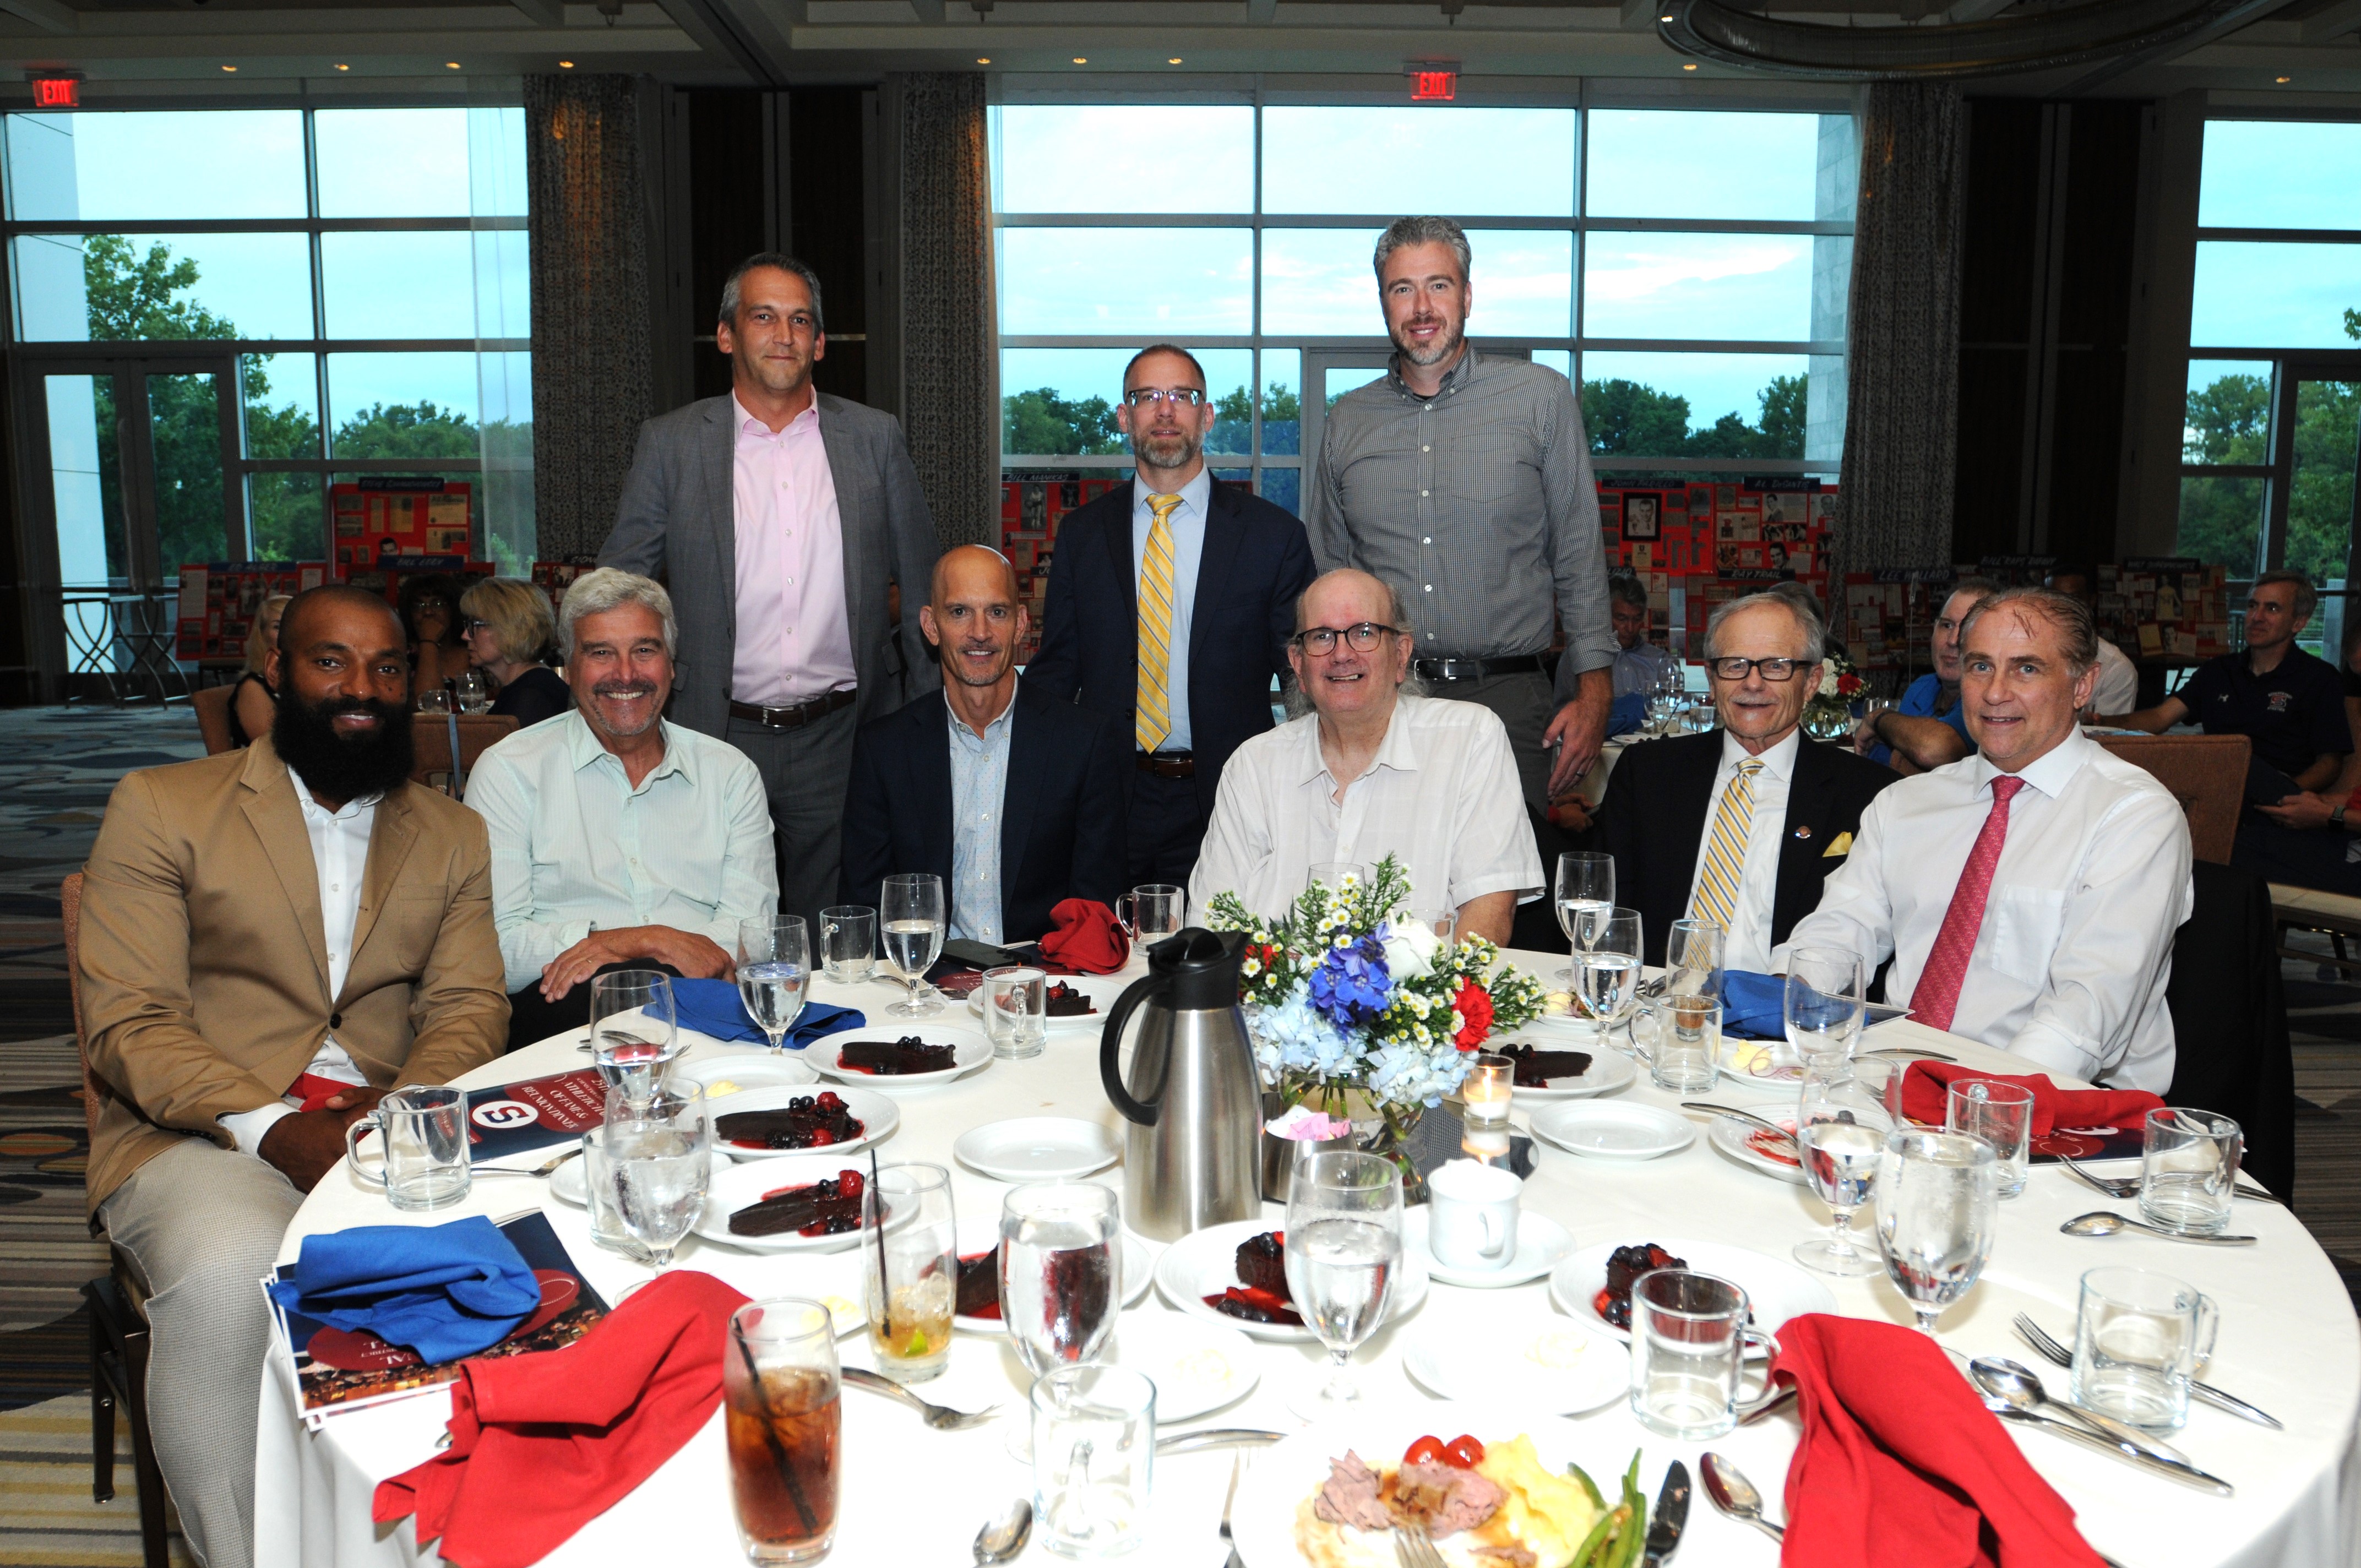 2023 Athletic Hall of Fame Dinner and Celebration